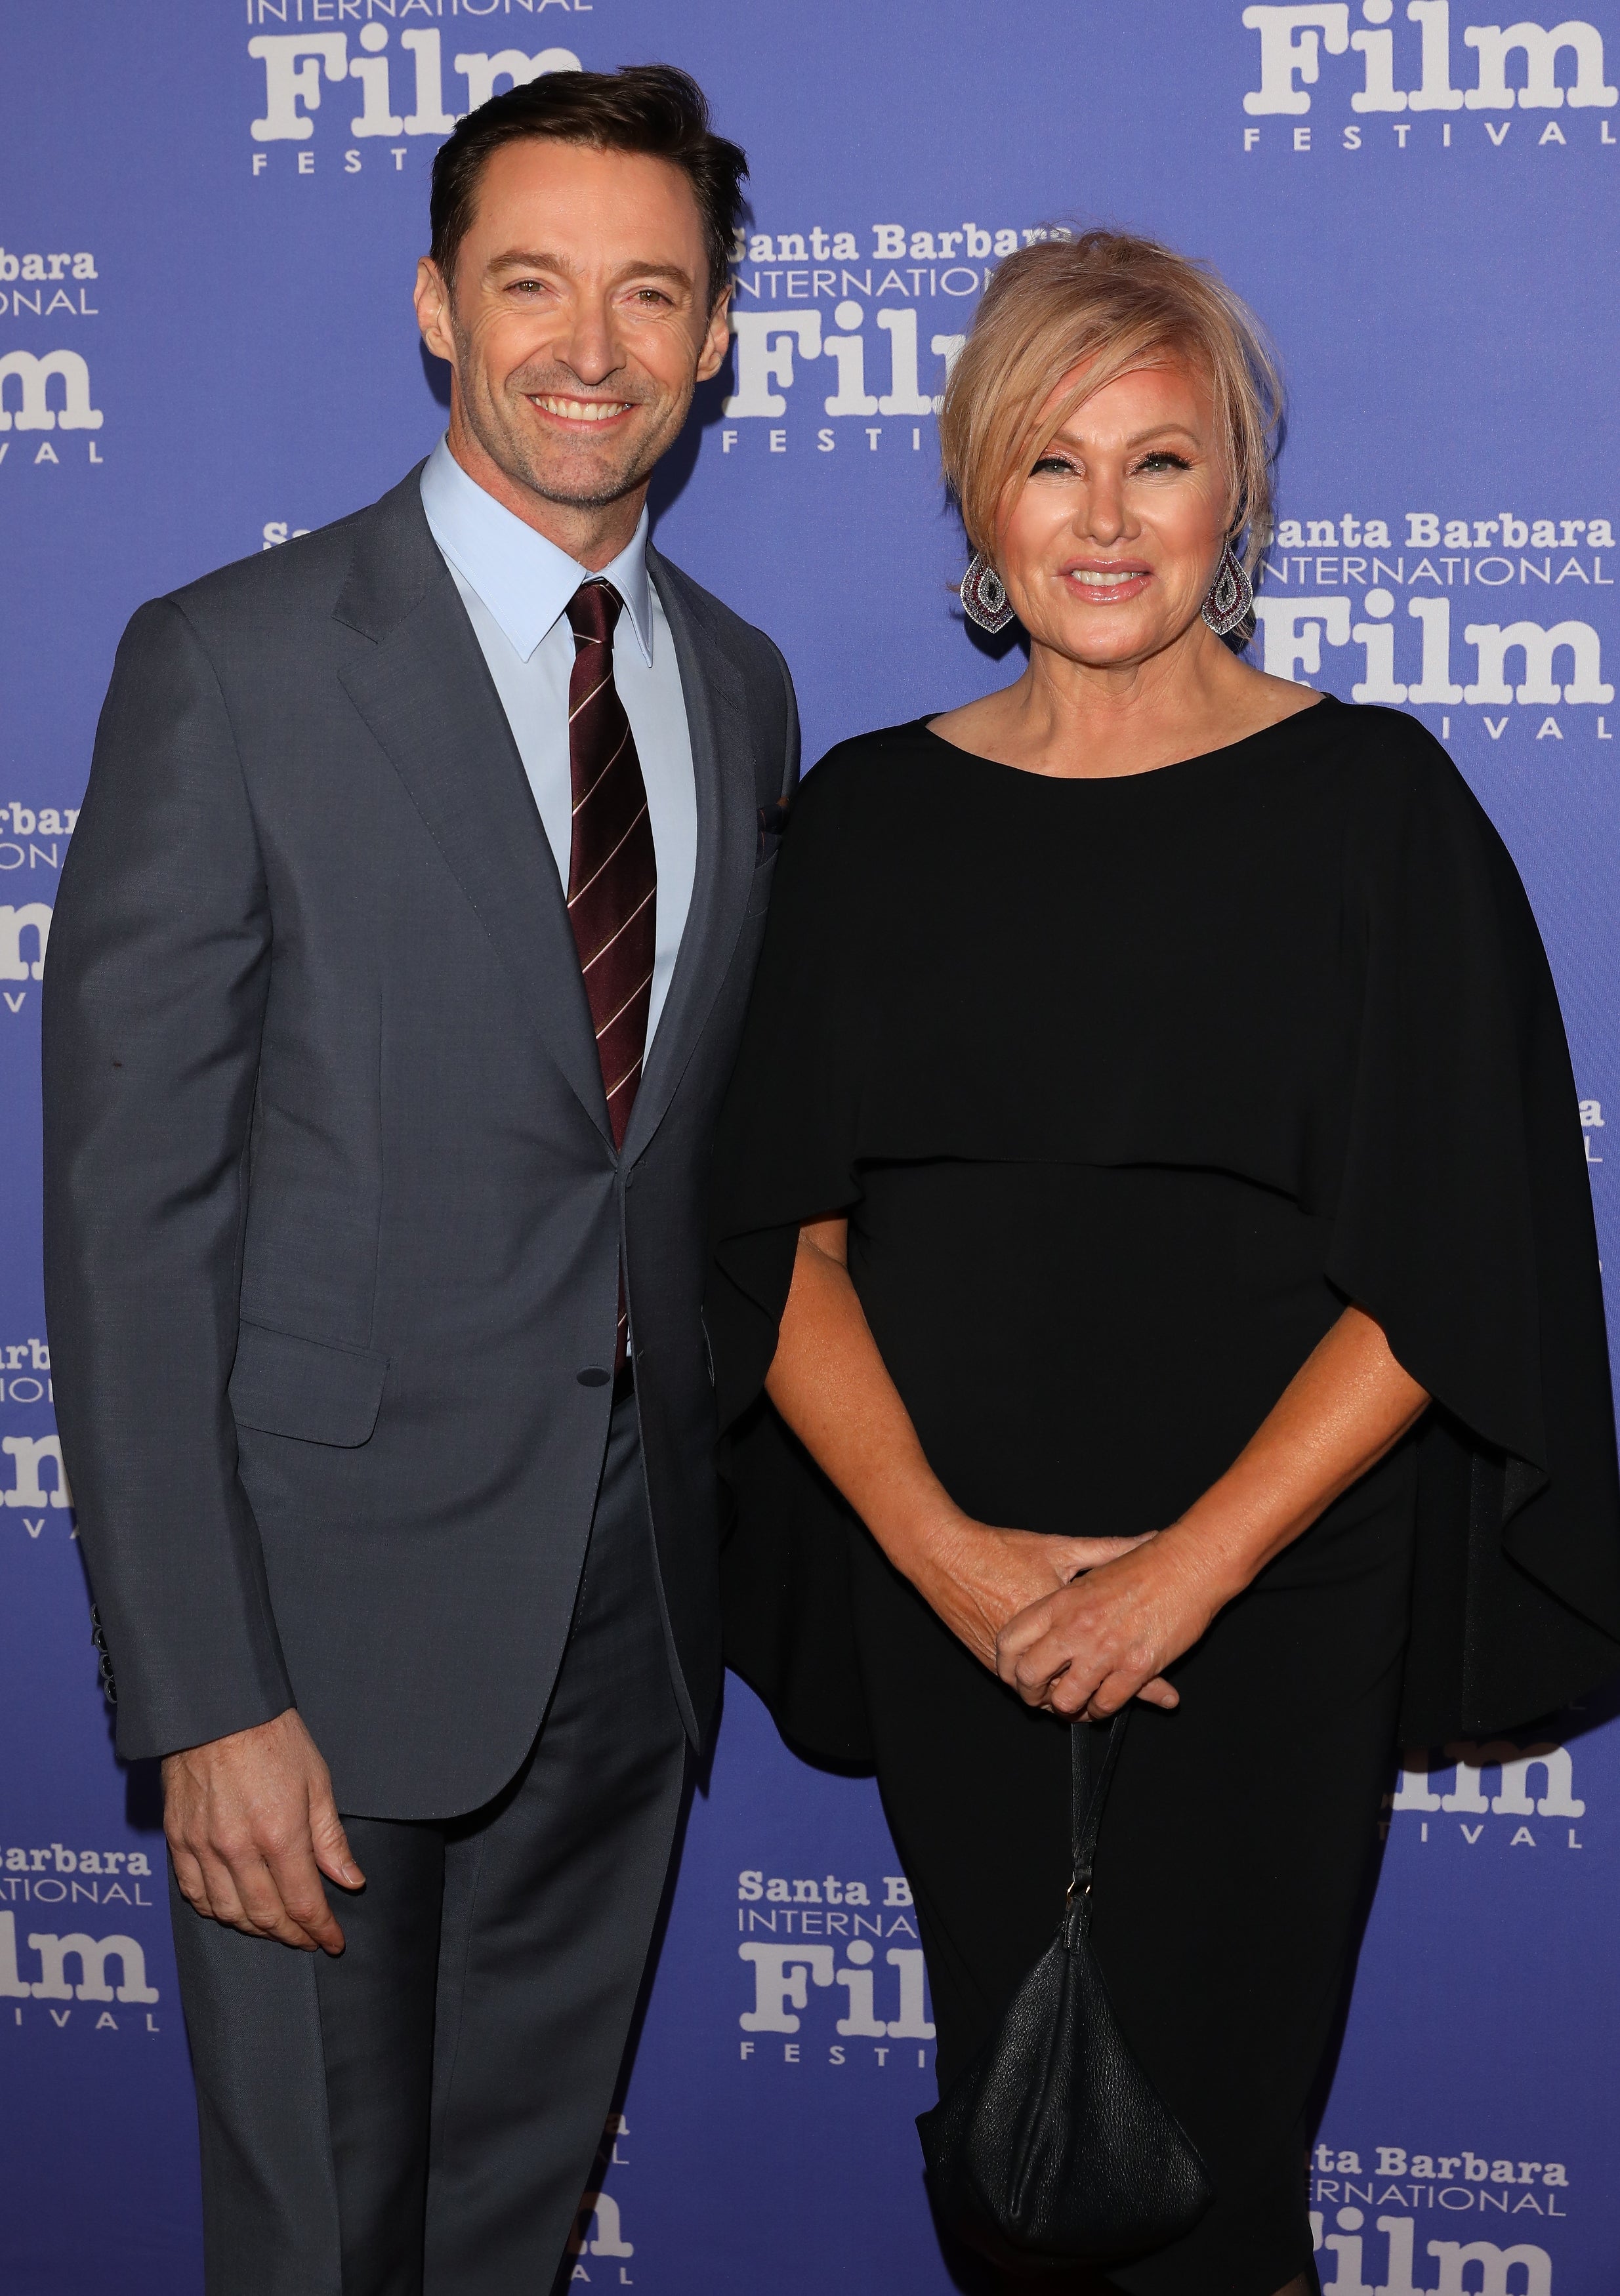 Hugh Jackman Says He 'Knew Very Early On' That Wife Deborra-Lee Furness Was  the One | Entertainment Tonight